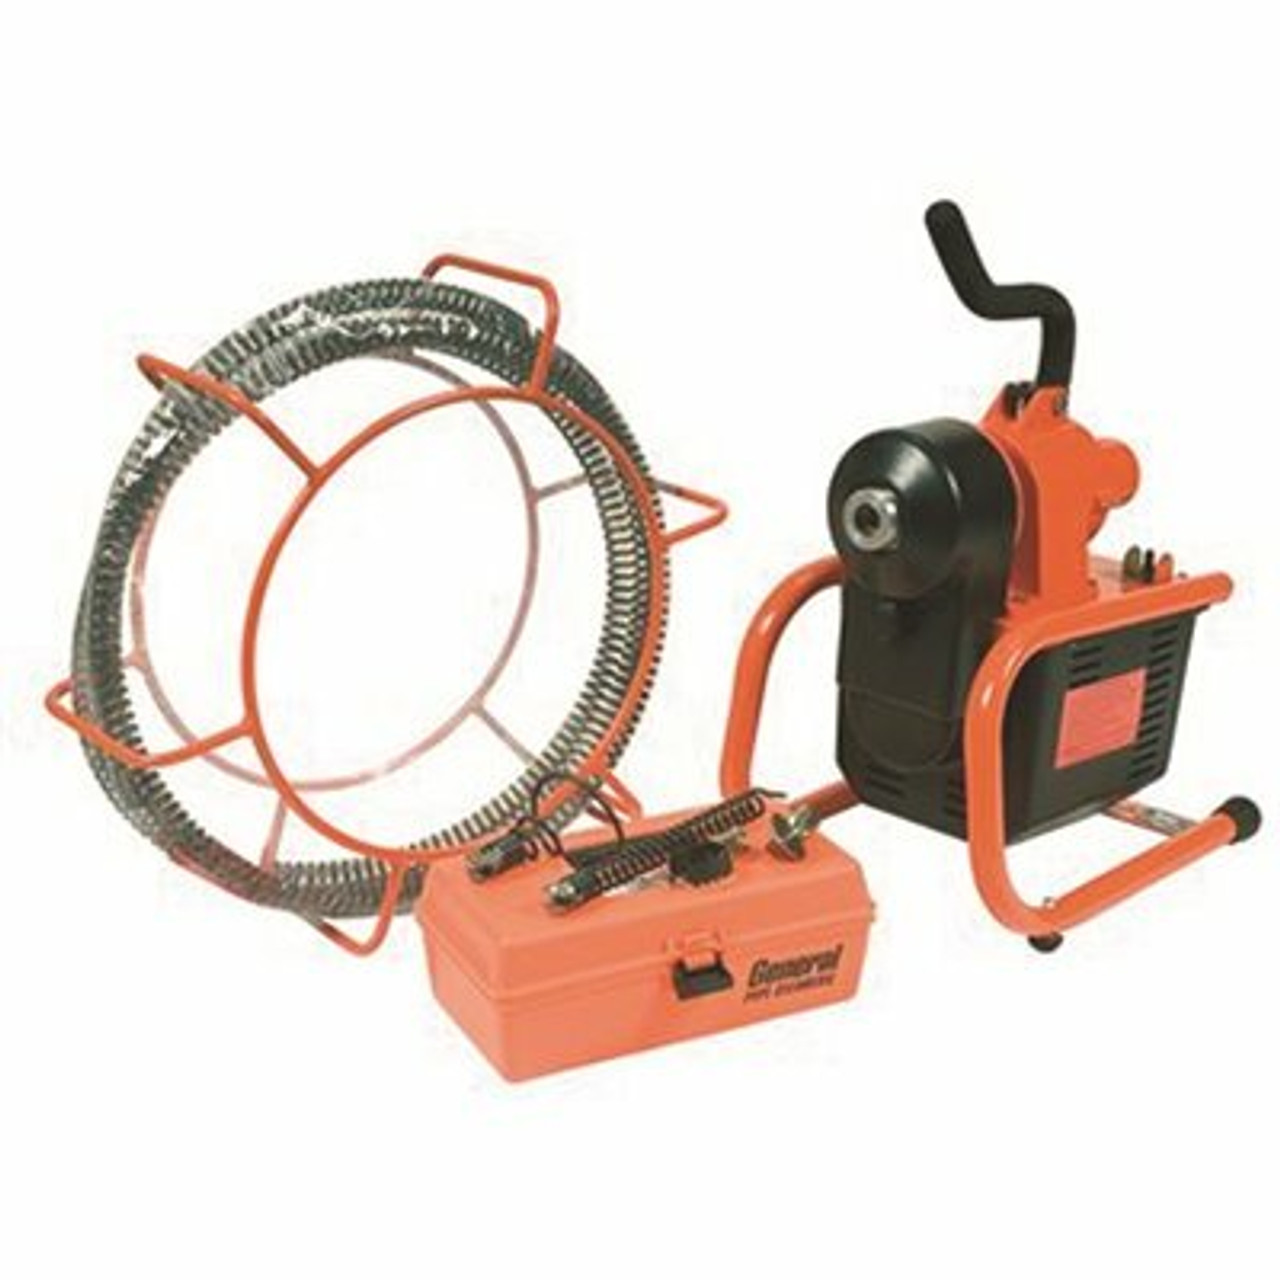 I-95 General's Drain Cleaning Machine With 7/8 In. X 15 Ft. Cable Sections